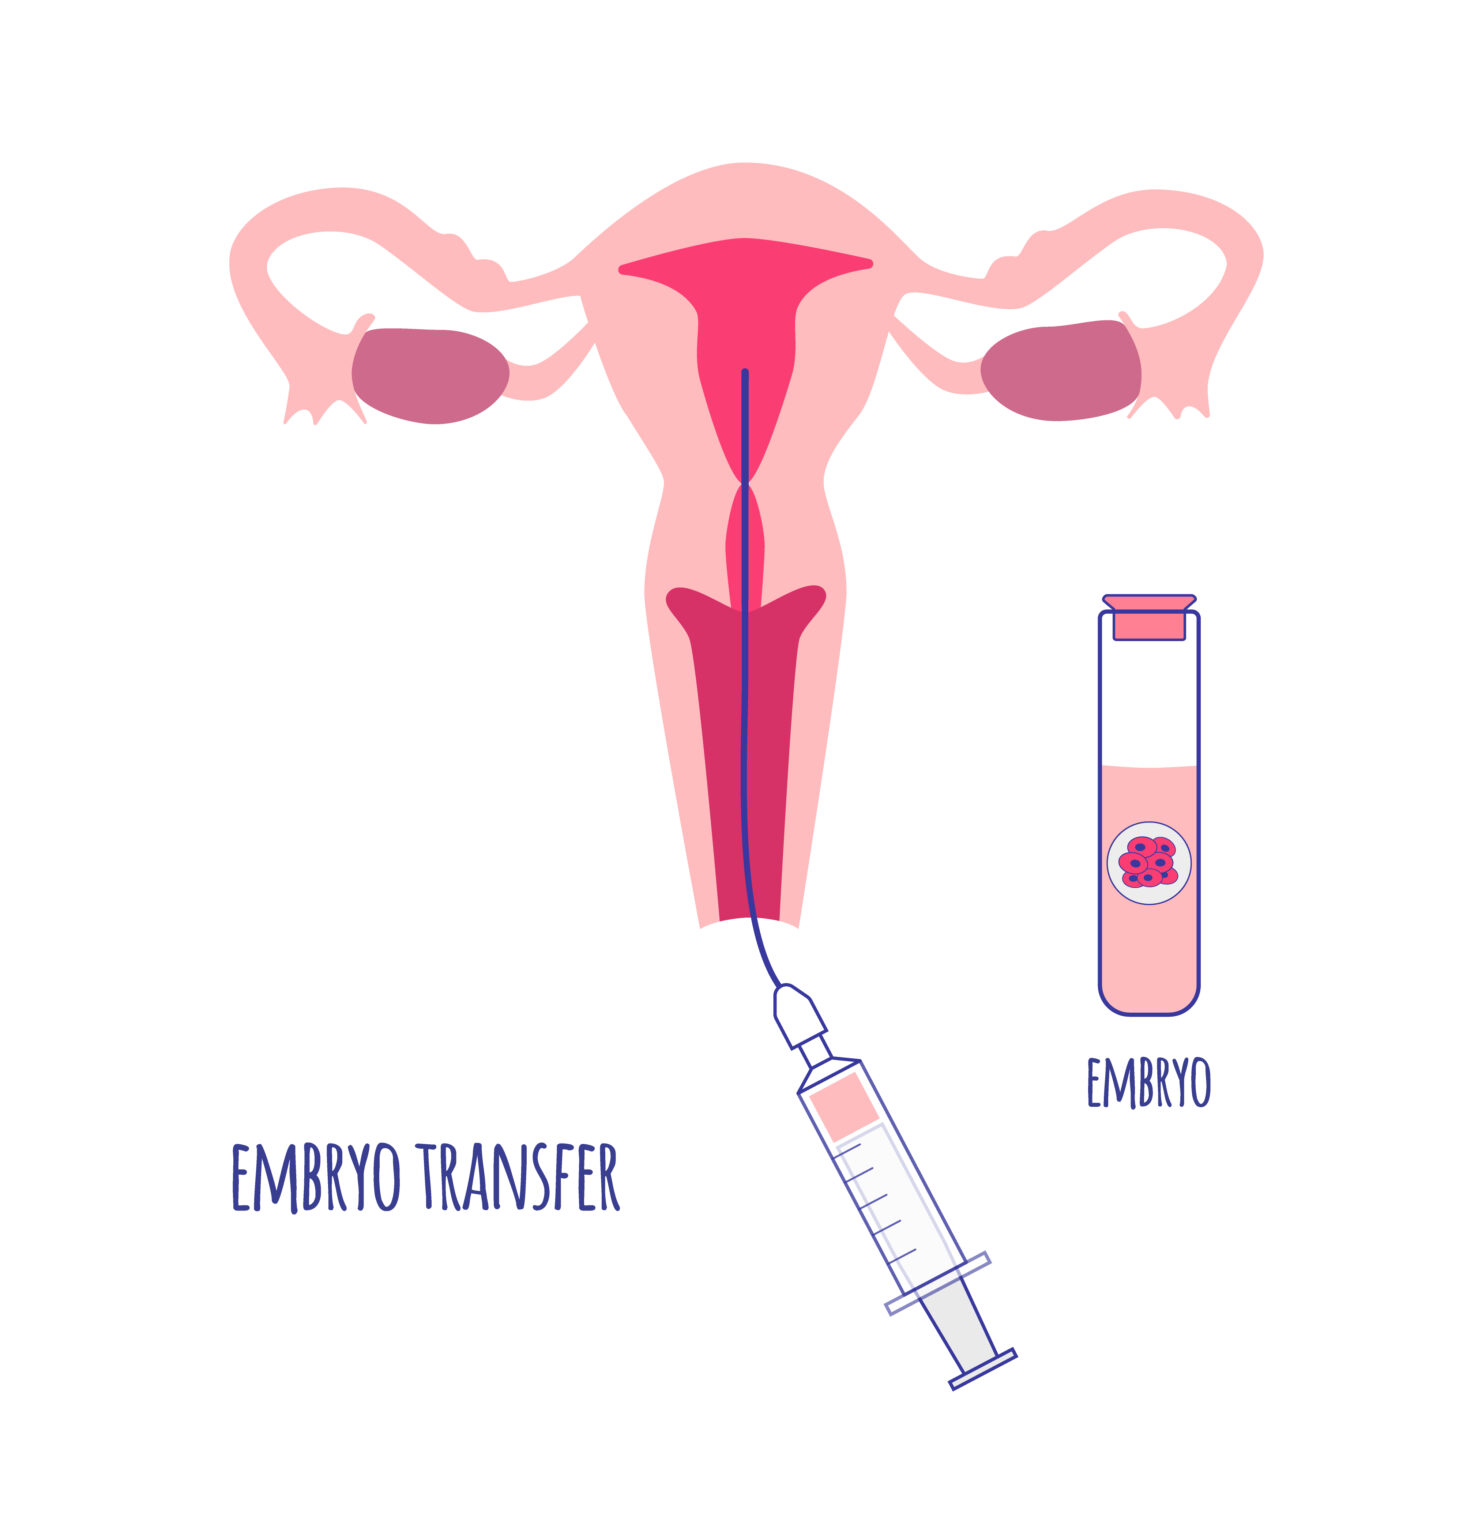 How to Prepare for Embryo Transfer?